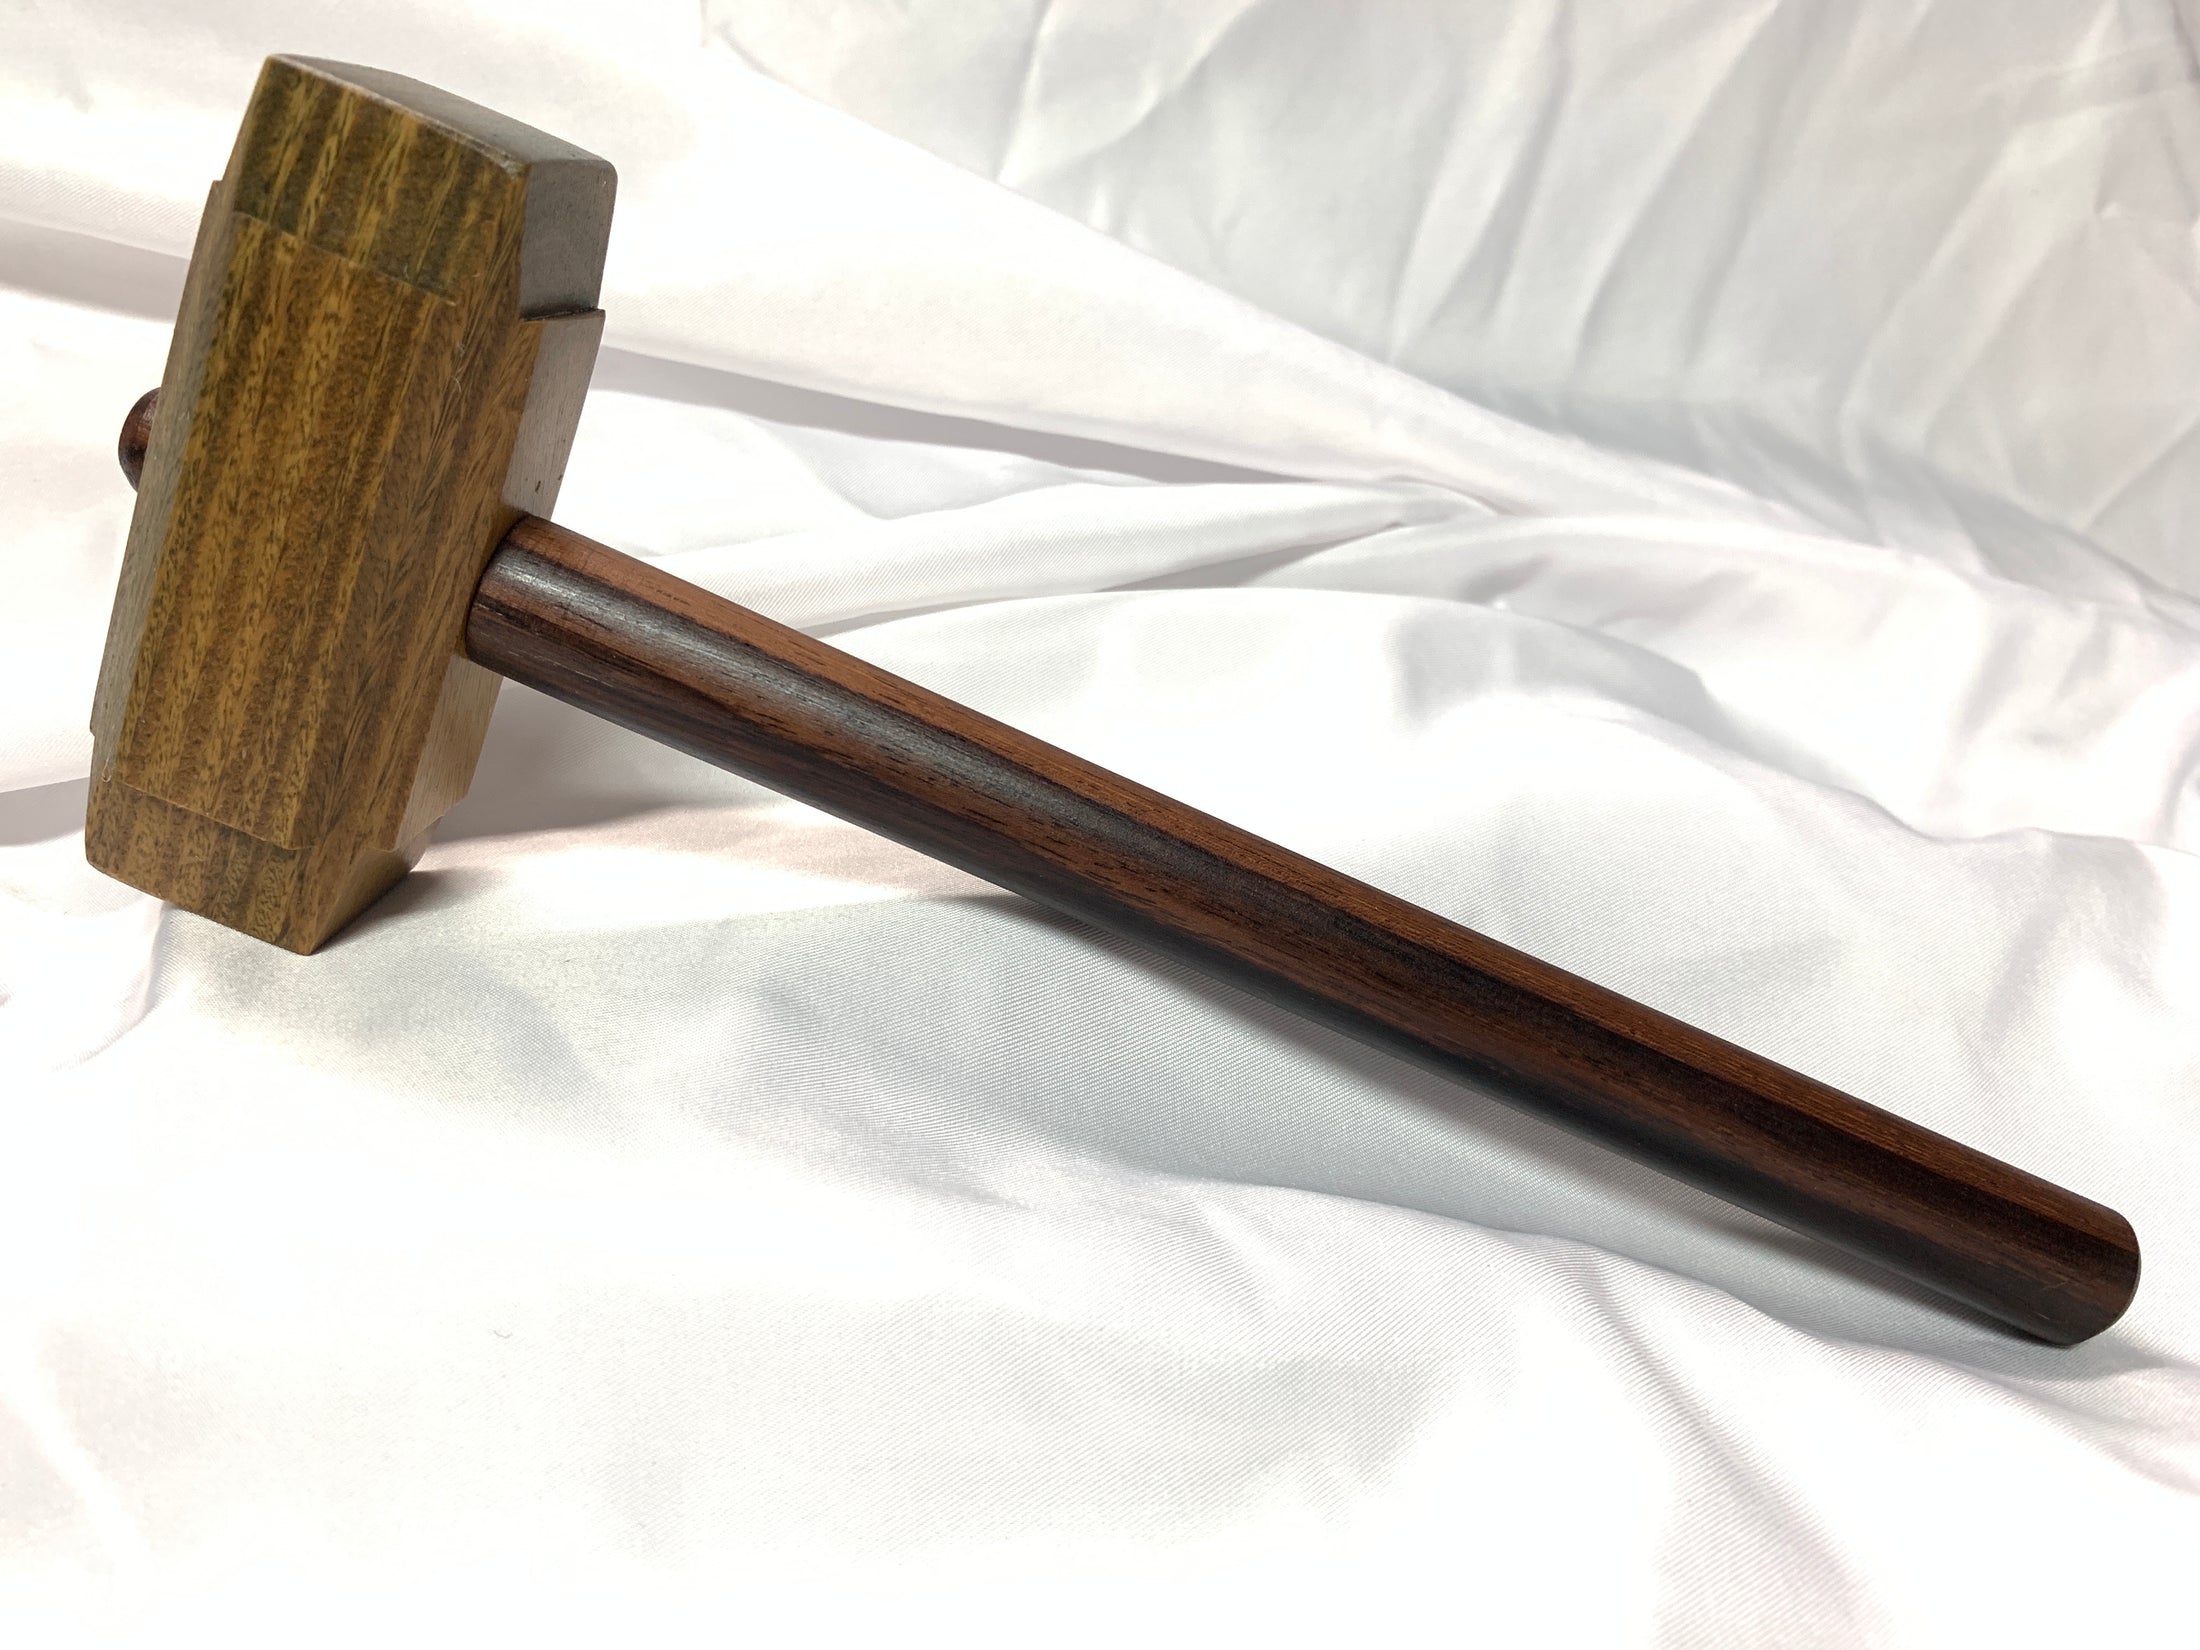 Thors Hammer Woodworking Mallet Lignum Vitae Head with East Indian Rosewood Handle Kings Fine Woodworking